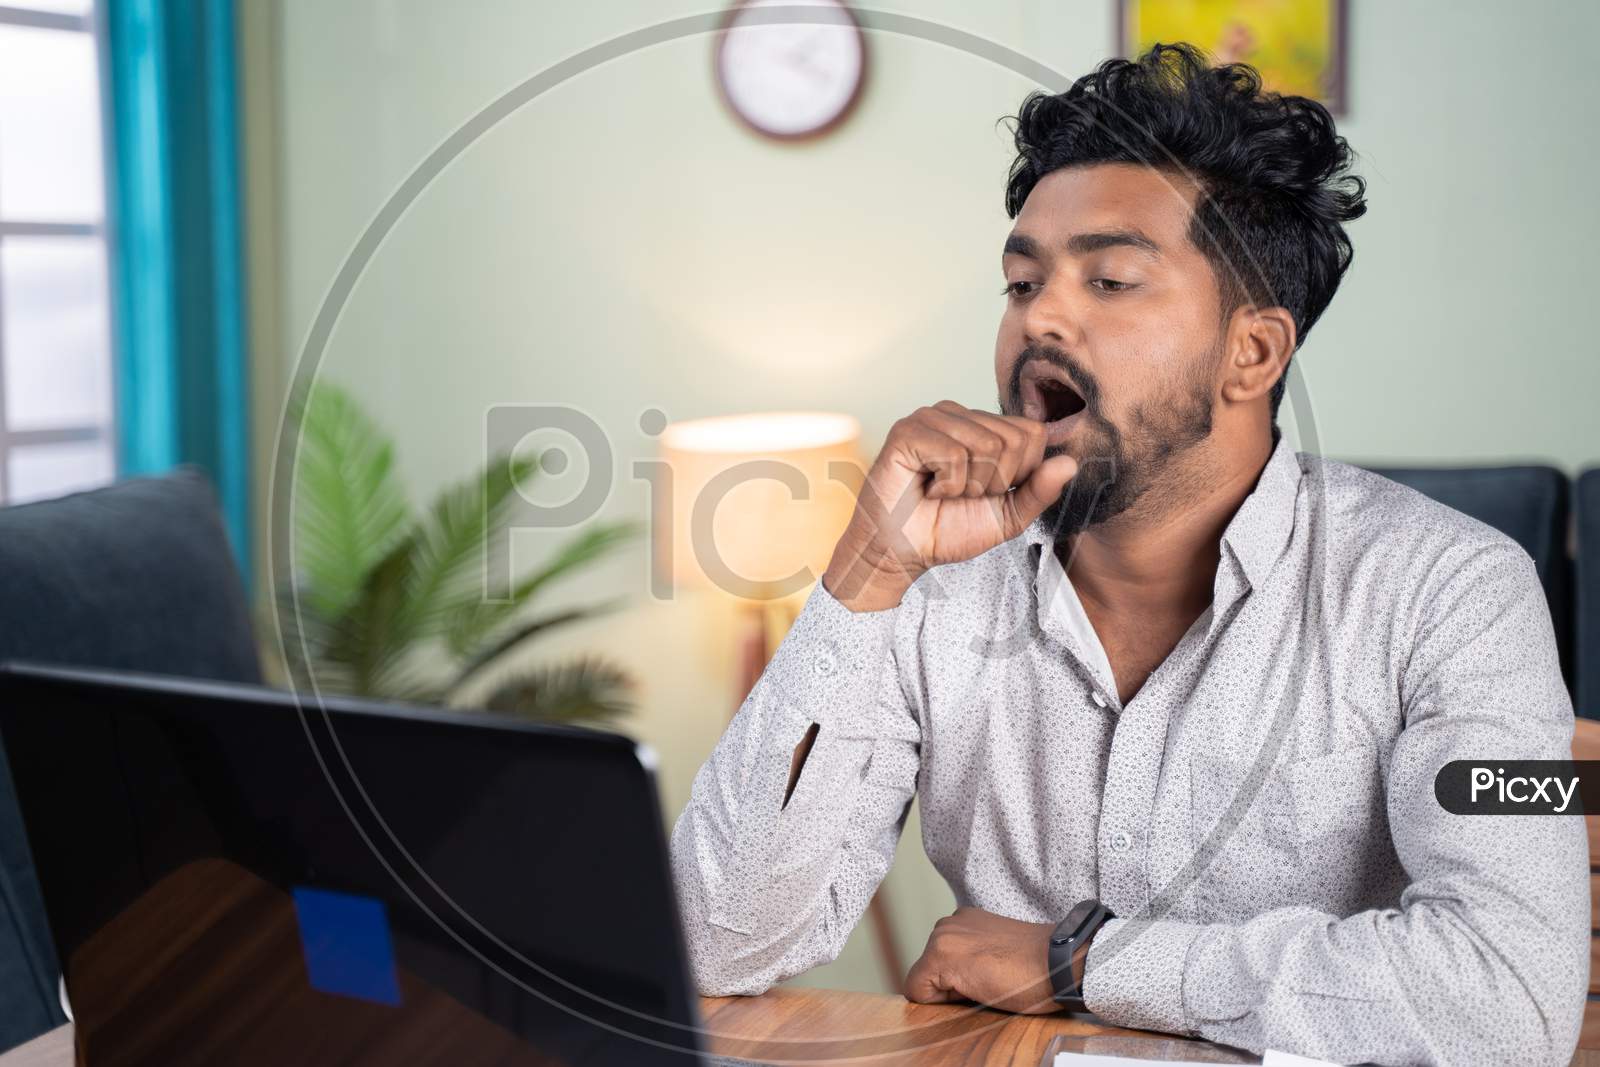 Young Man Got Tired And Yawning While Working On Laptop At Home - Concept Sleepless Work, Fatigue And Exhausted It Professional Job During Work From Home.